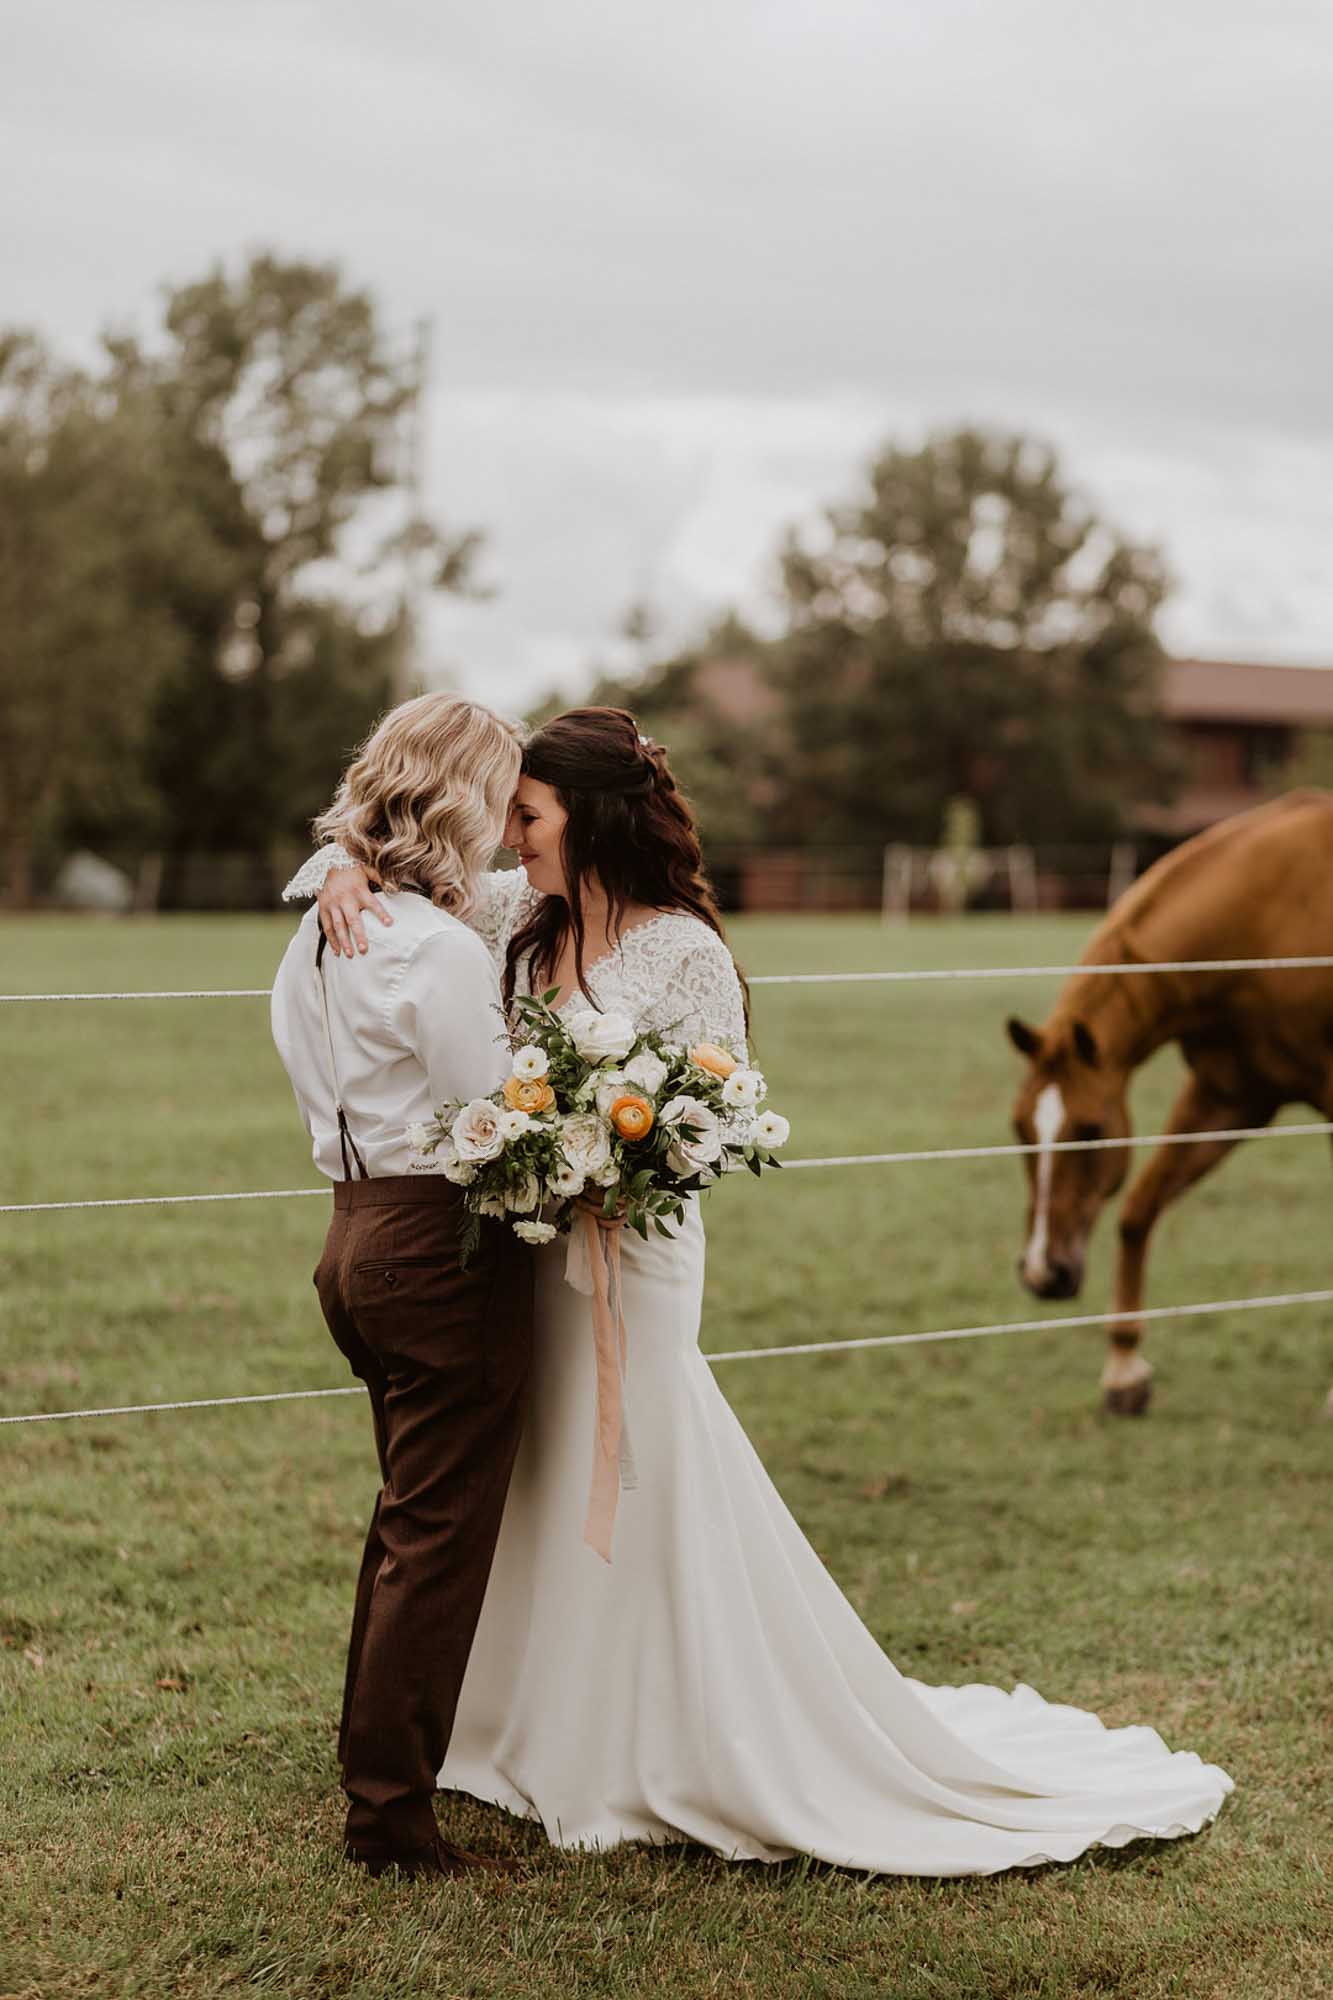 Outdoor Tennessee wedding filled with twinkle lights | Joshua Corey Photo | Featured on Equally Wed, the leading LGBTQ+ wedding magazine